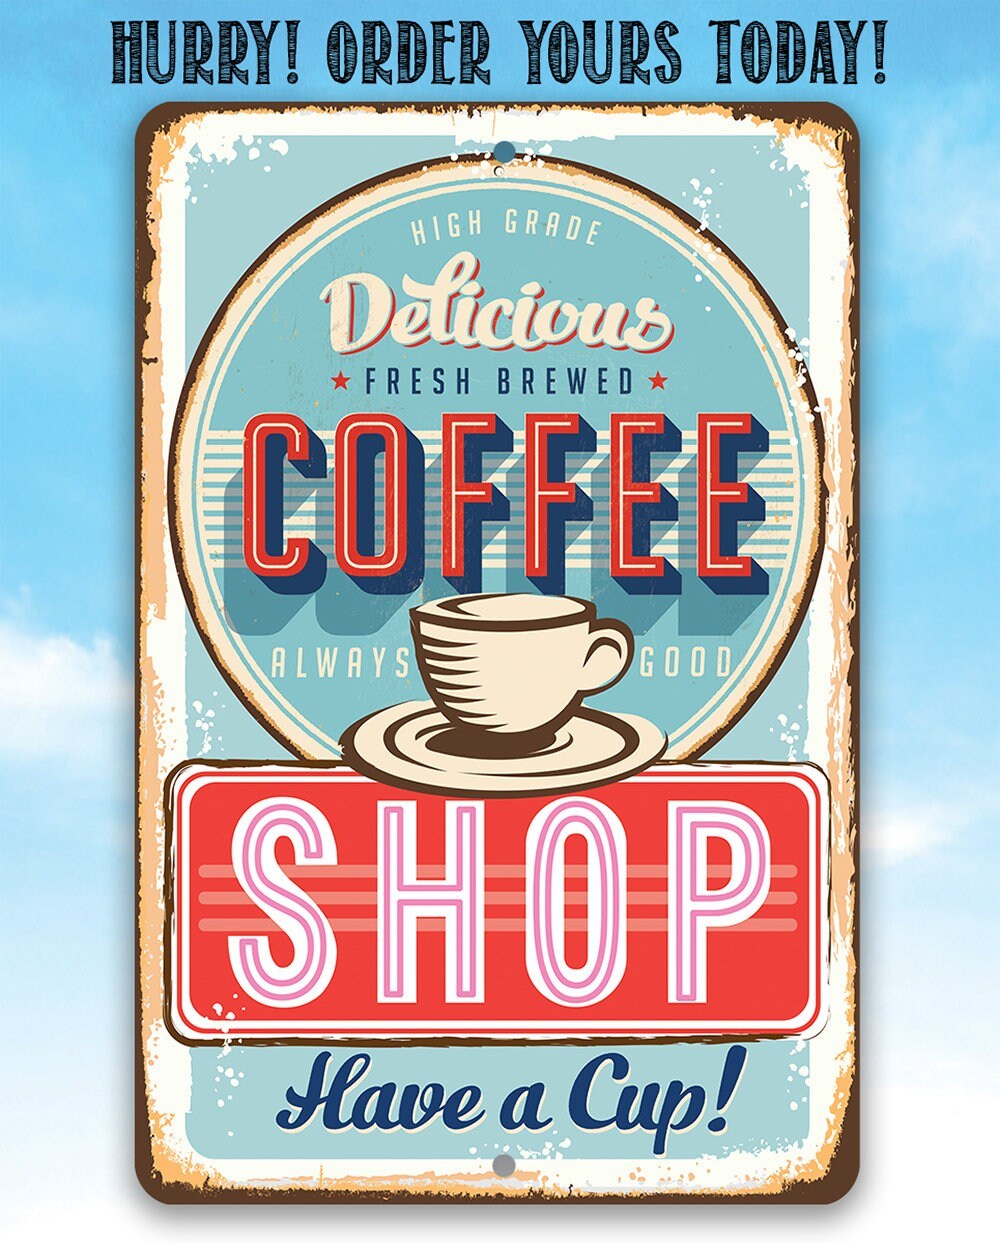 Delicious Fresh Brewed Coffee - Metal Sign Metal Sign Lone Star Art 